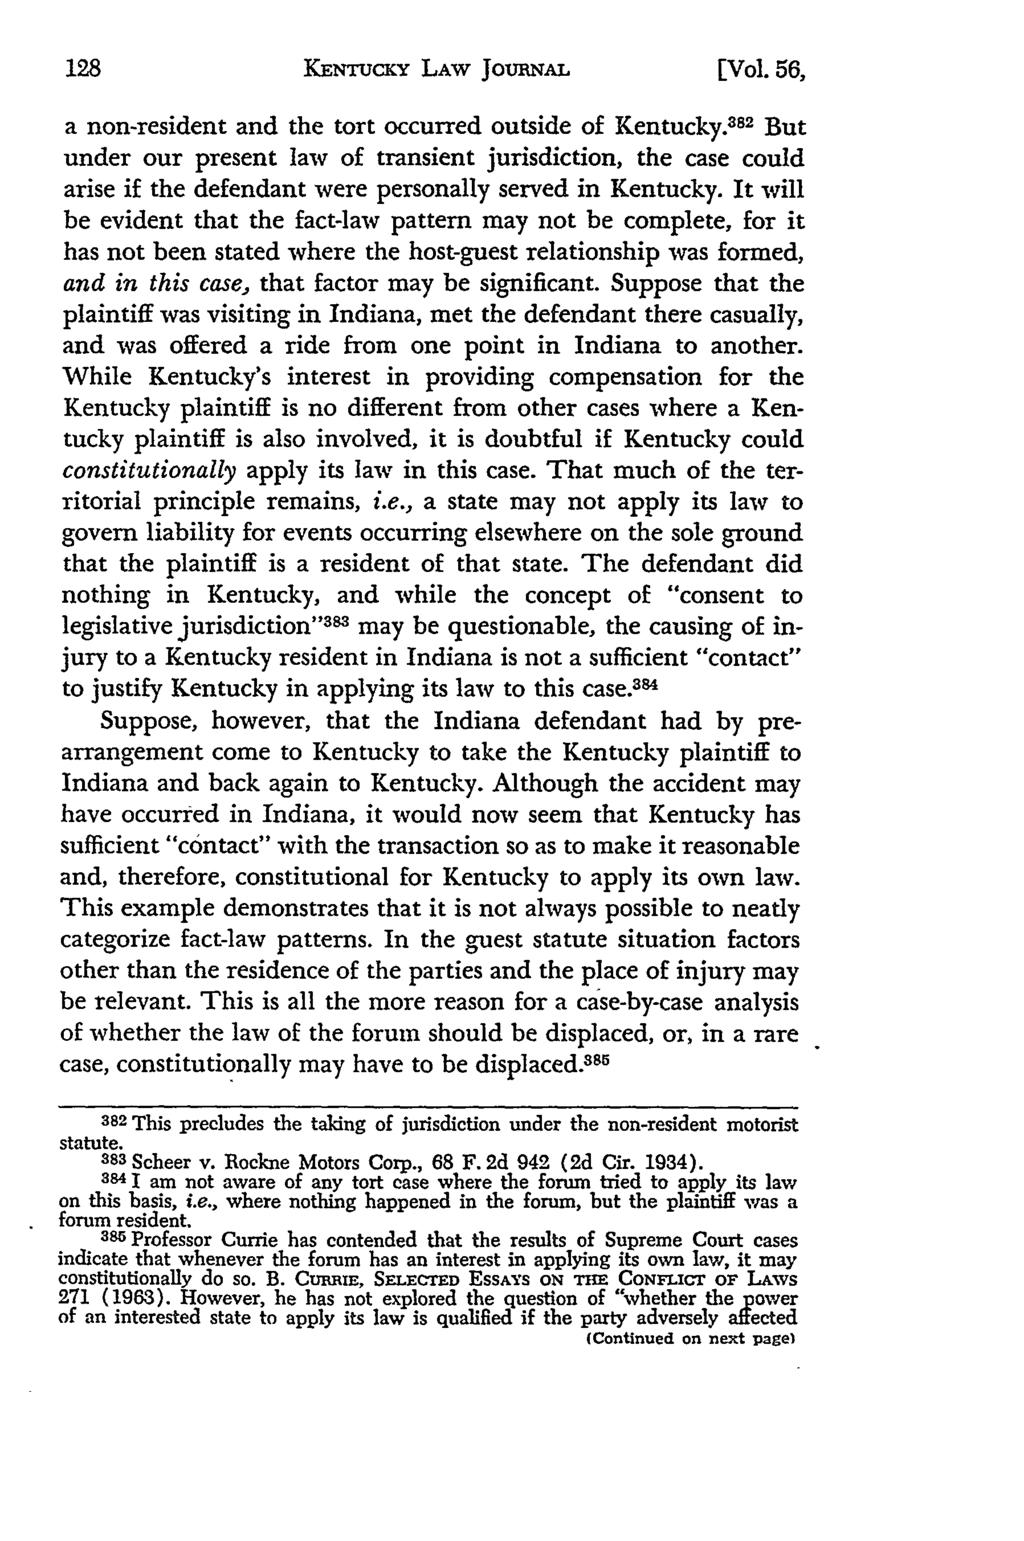 KENTUCKY LAW JoUmVAL [Vol. 56, a non-resident and the tort occurred outside of Kentucky.